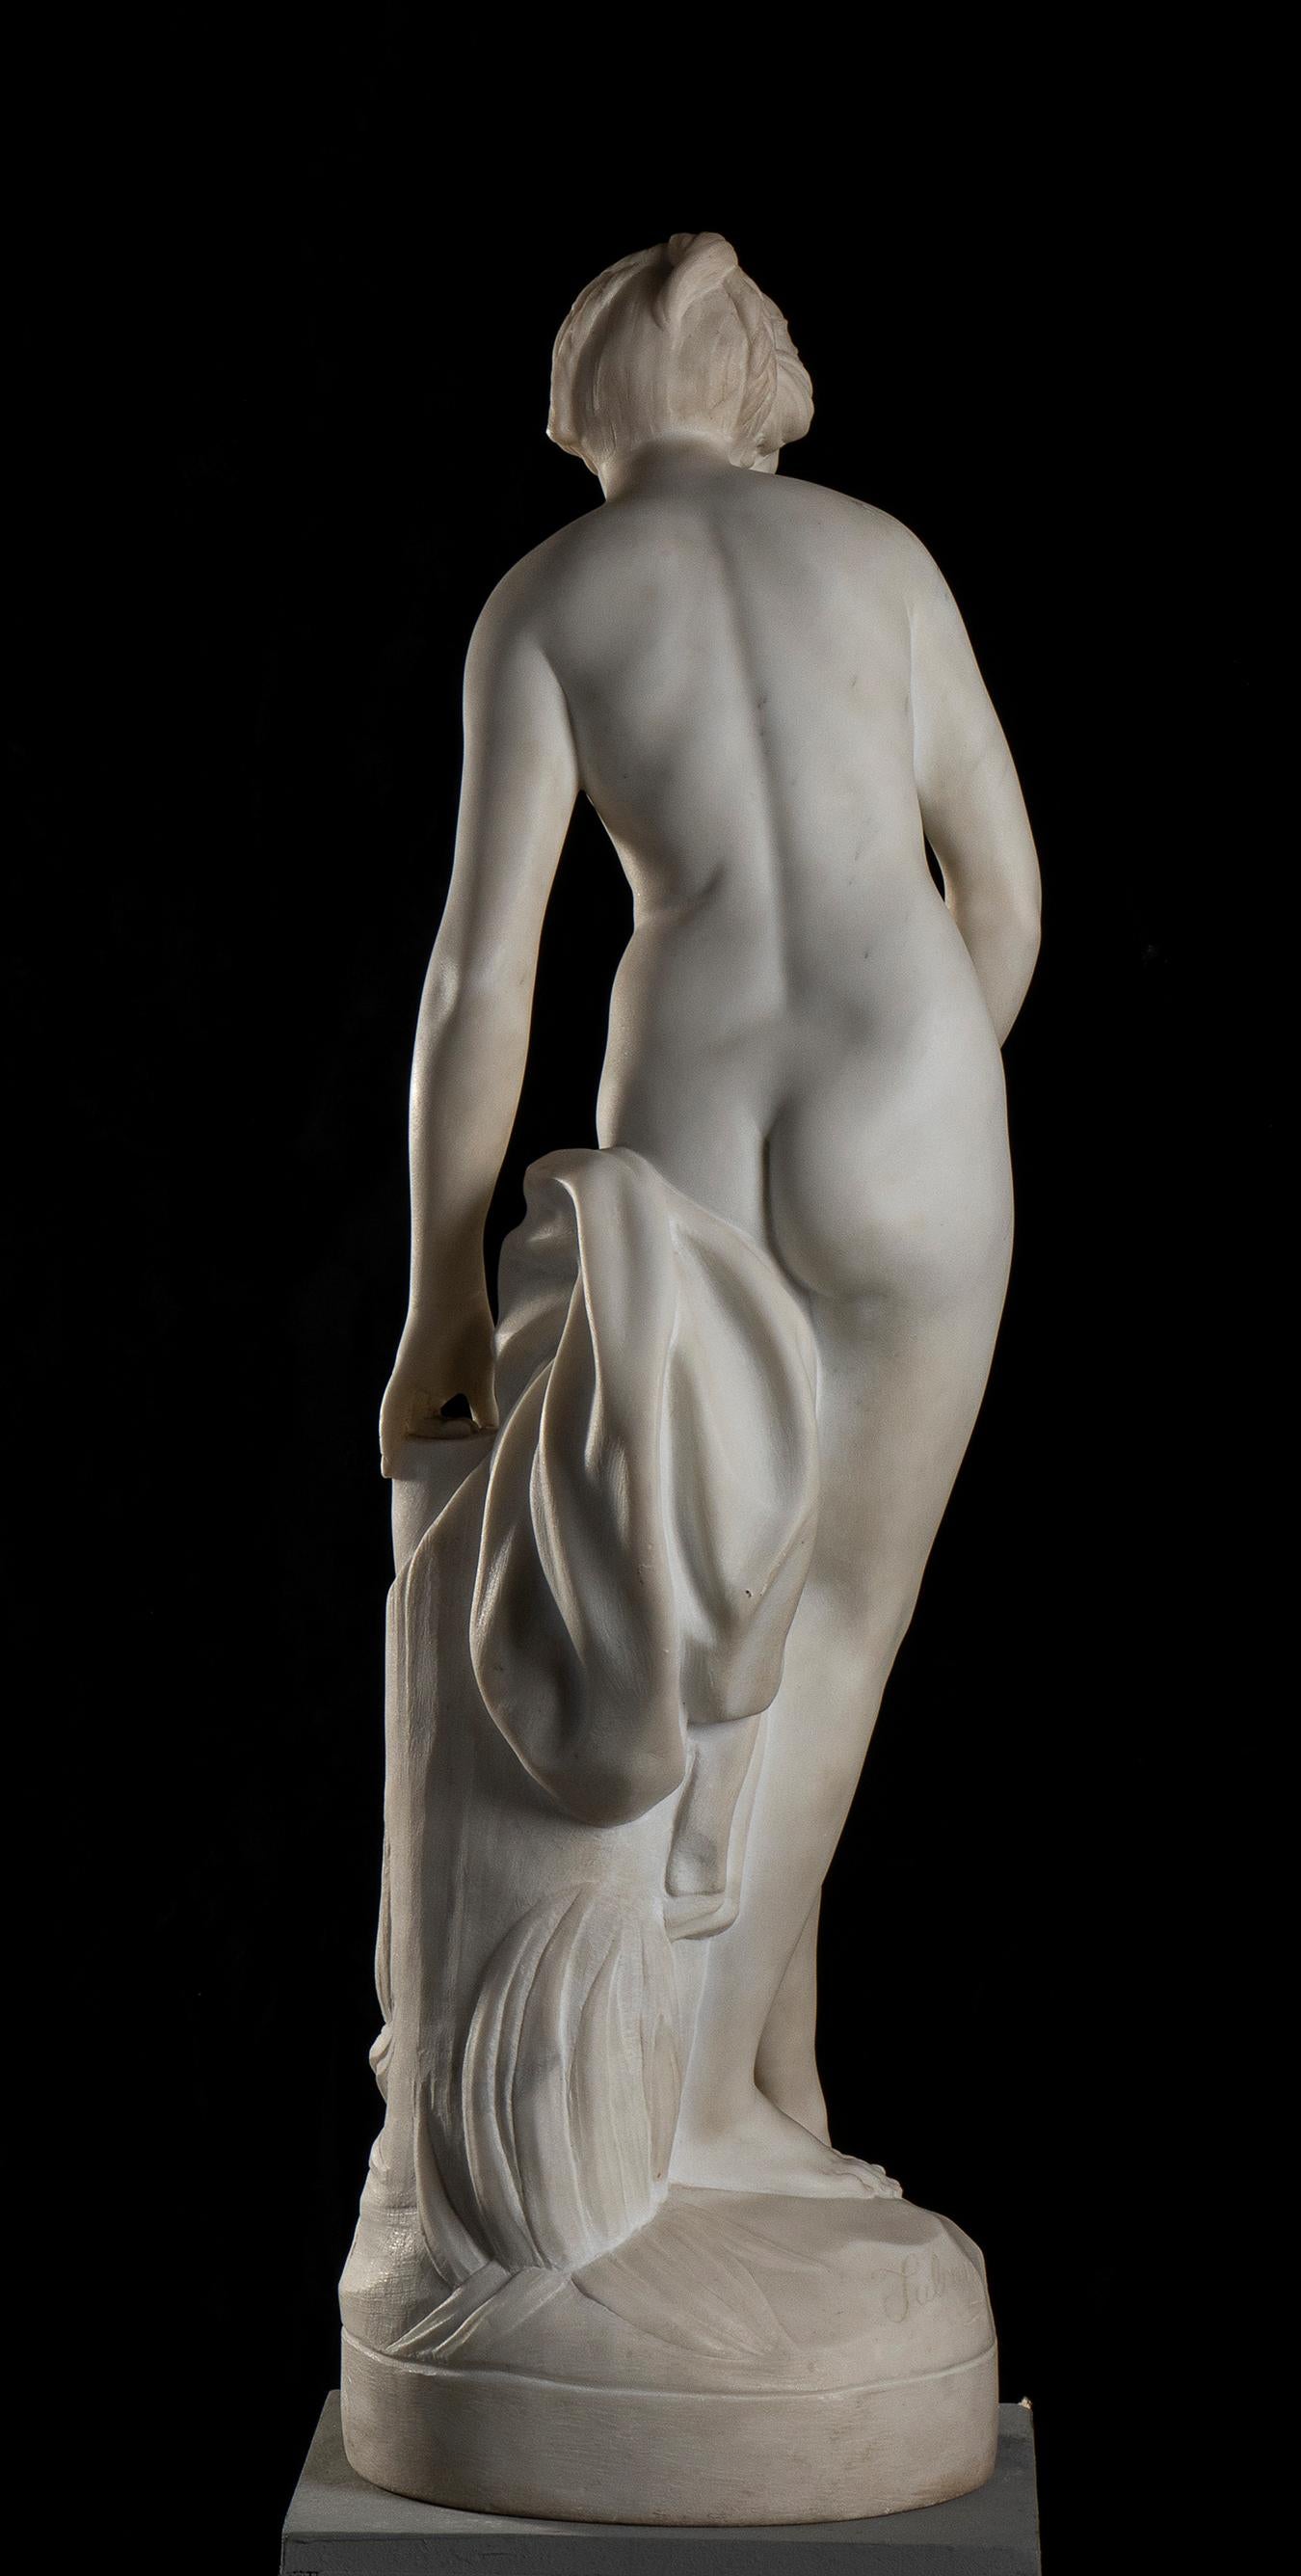 Baigneuse, Marble Sculpture signed Falconet  - Black Nude Sculpture by Étienne Maurice Falconet